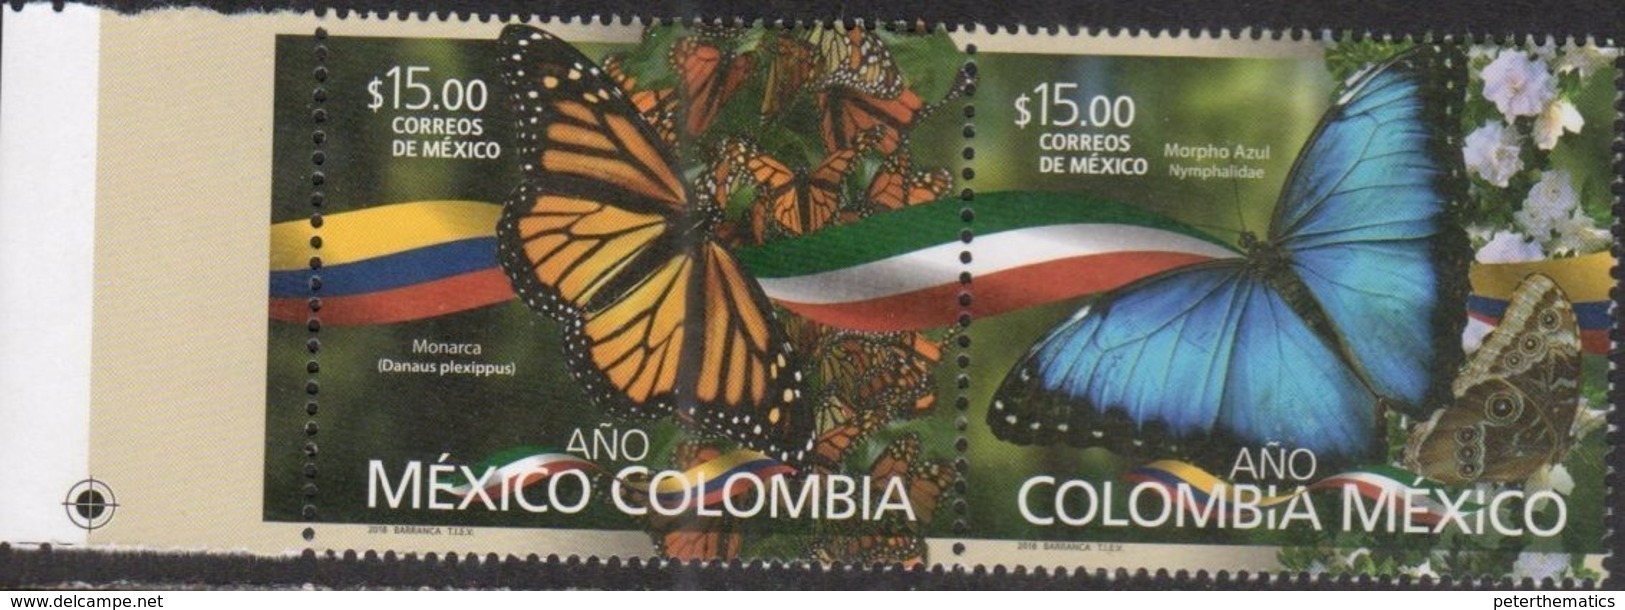 MEXICO, 2018, MNH, MEXICO COLOMBIA YEAR, BUTTERFLIES, JOINT ISSUE, 2v - Farfalle